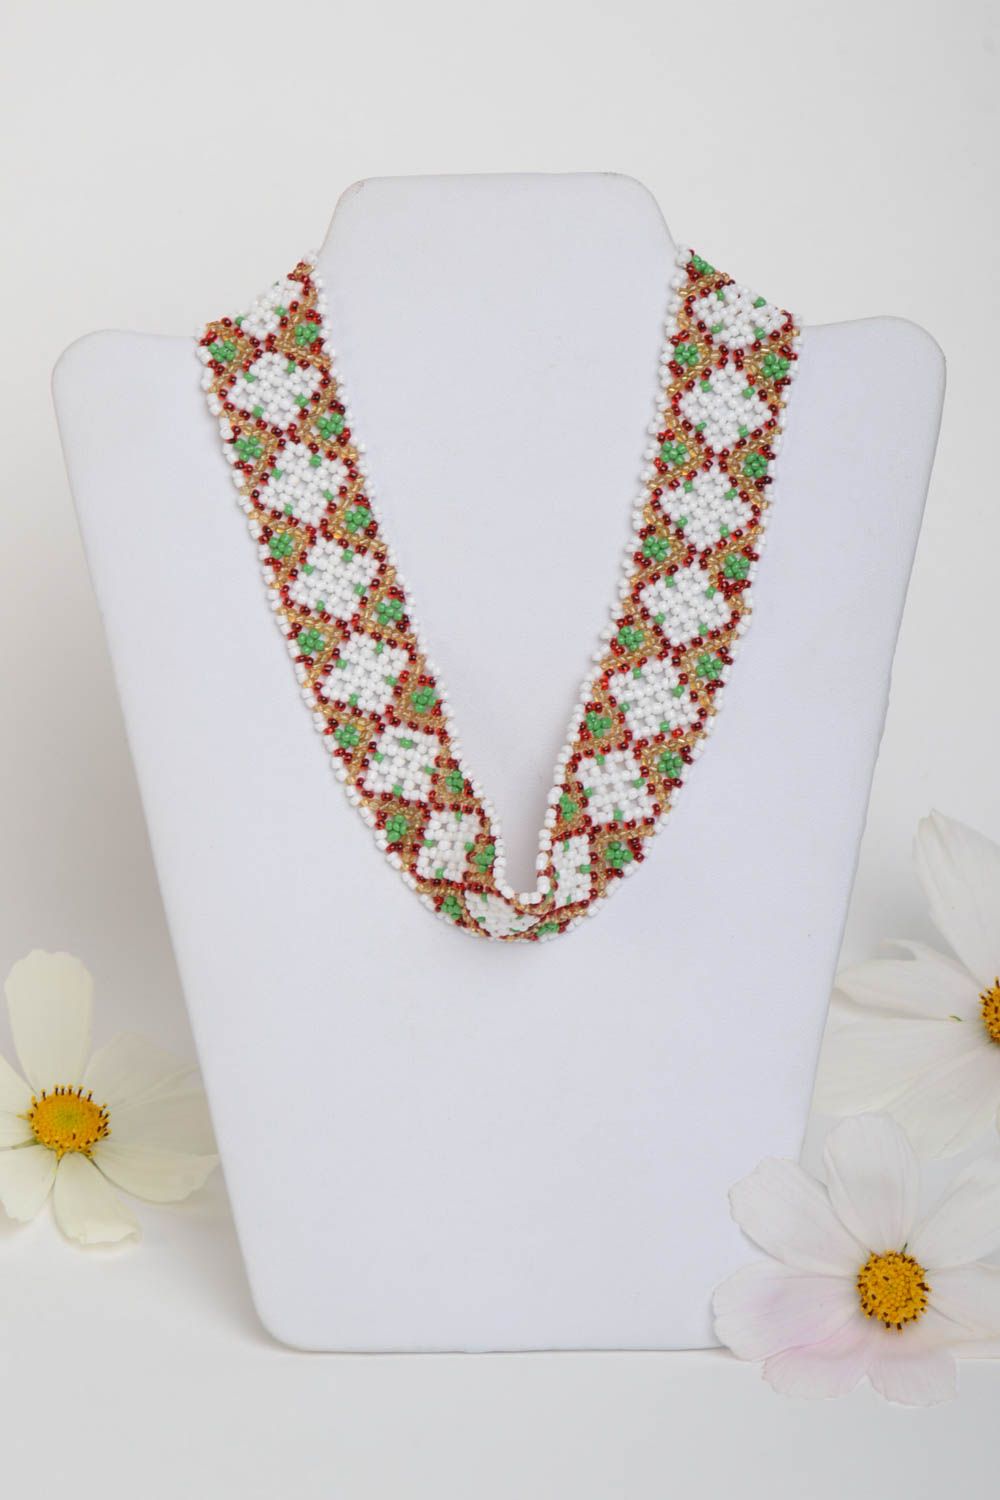 Beaded necklace handmade jewelry long necklace beaded jewelry gift idea for her photo 1